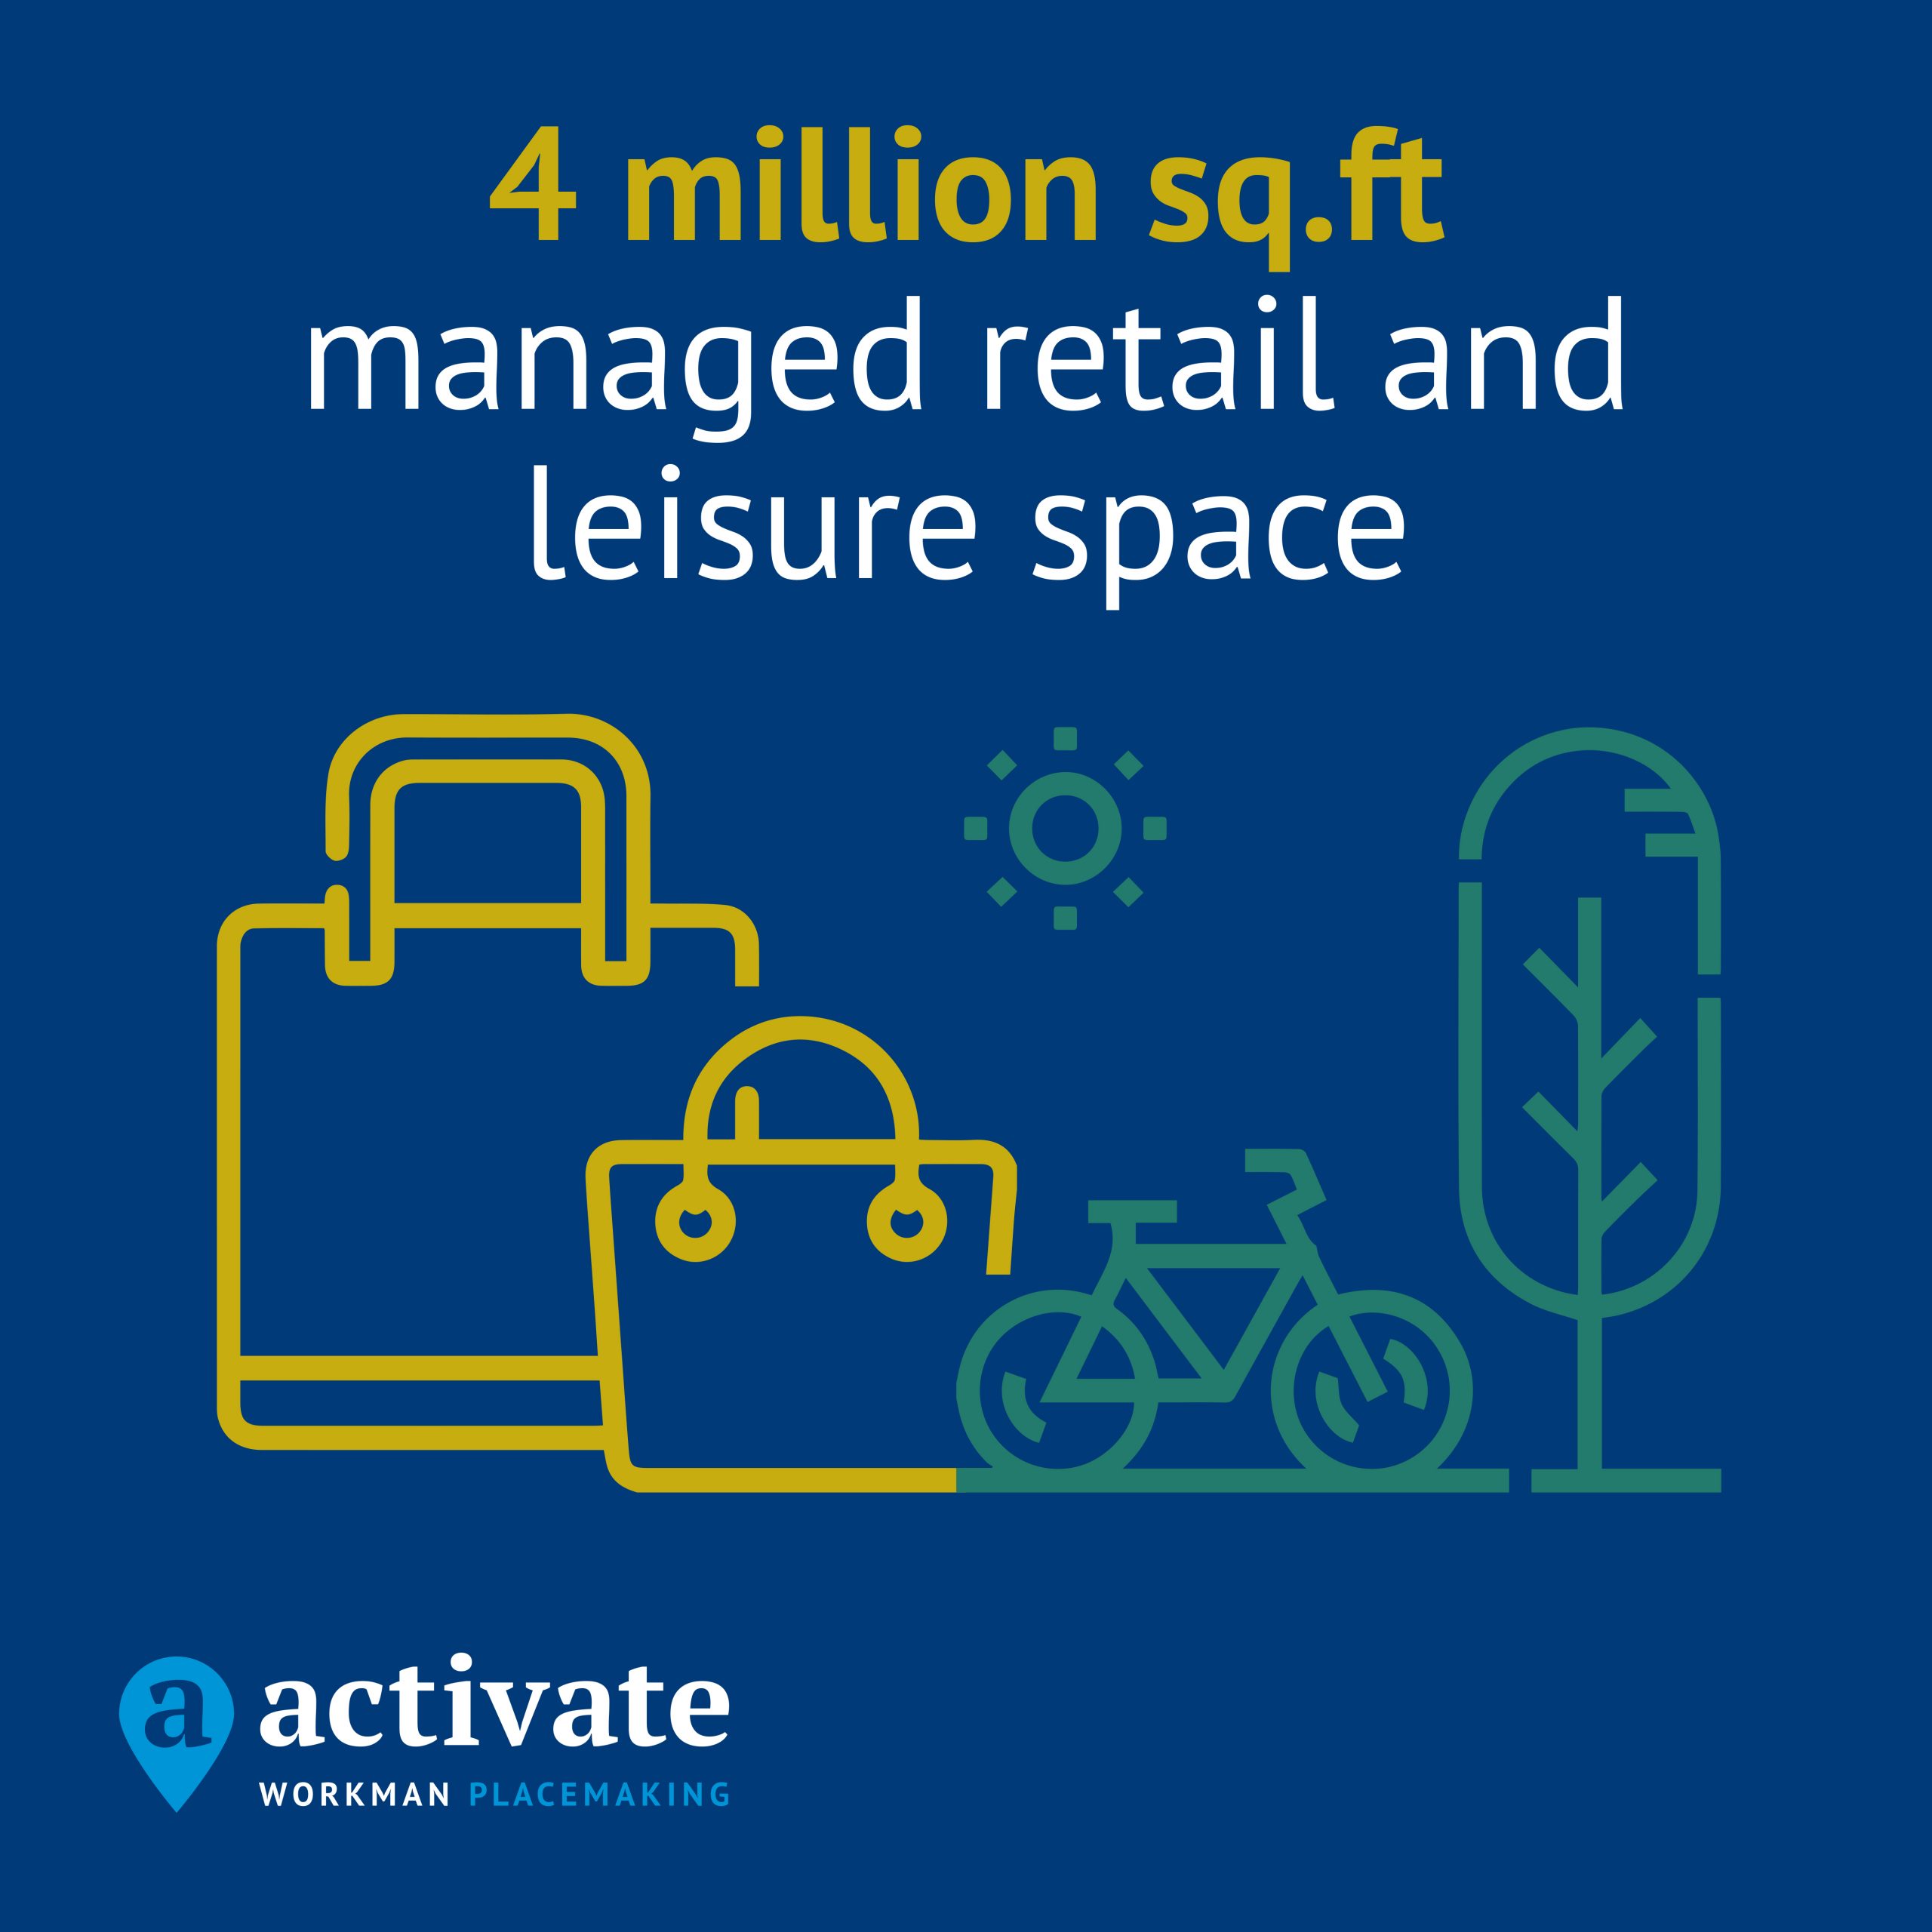 4 million sq.ft managed retail and leisure space